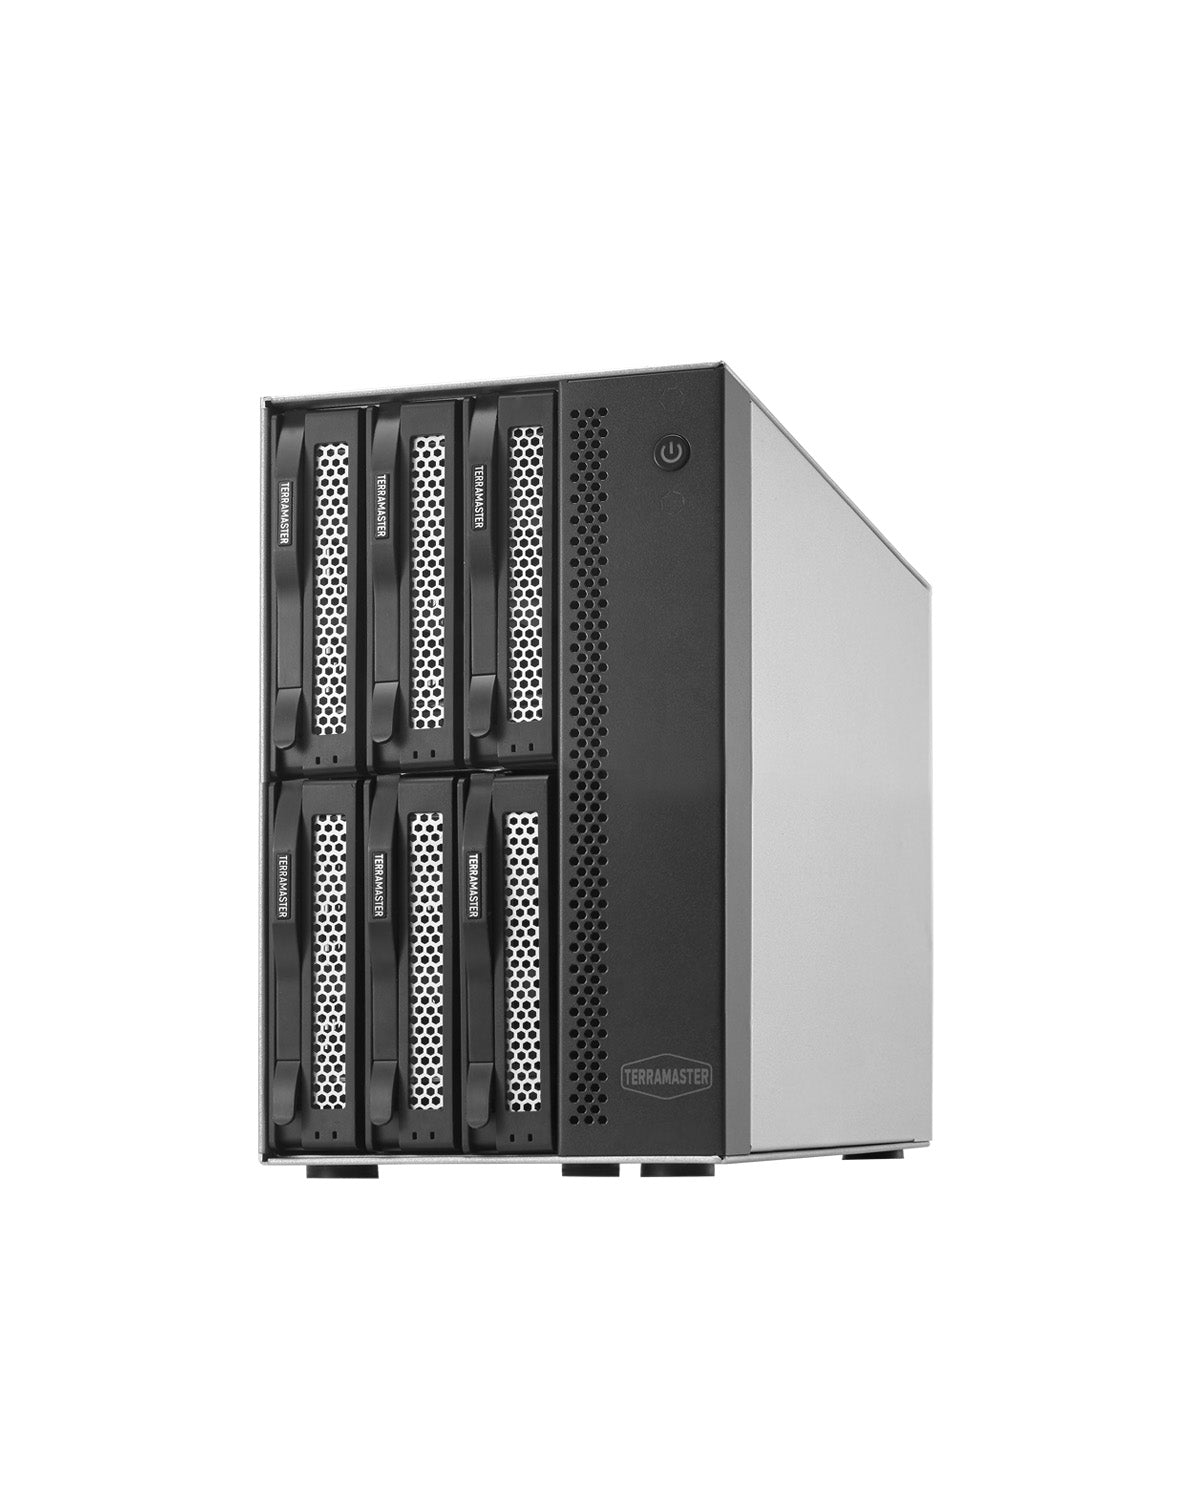 TERRAMASTER T6-423 6 Bay NAS Storage - High Performance for SMB with N5105/5095 QuadCore CPU 4GB DDR4 Memory, 2.5GbE Port x 2, Network Storage Server, Diskless.